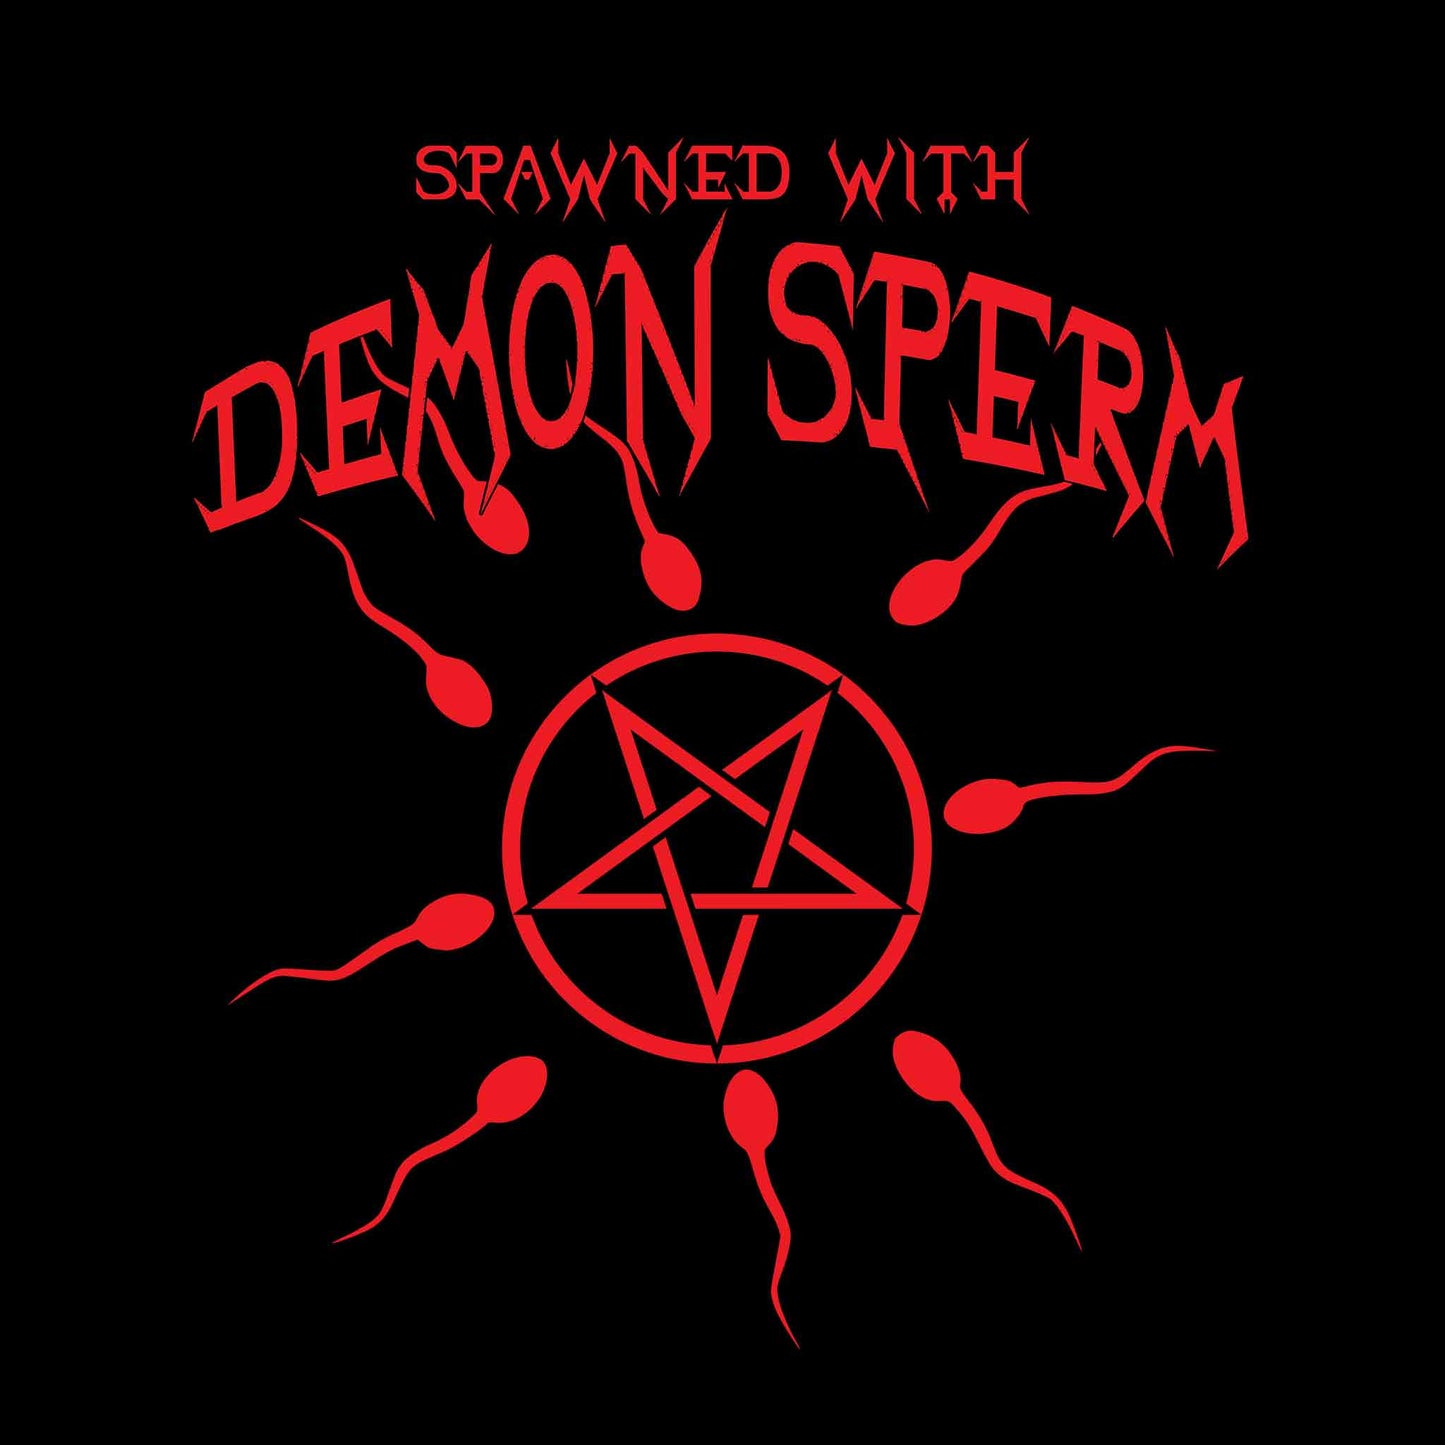 Spawned With Demon Sperm T-Shirt